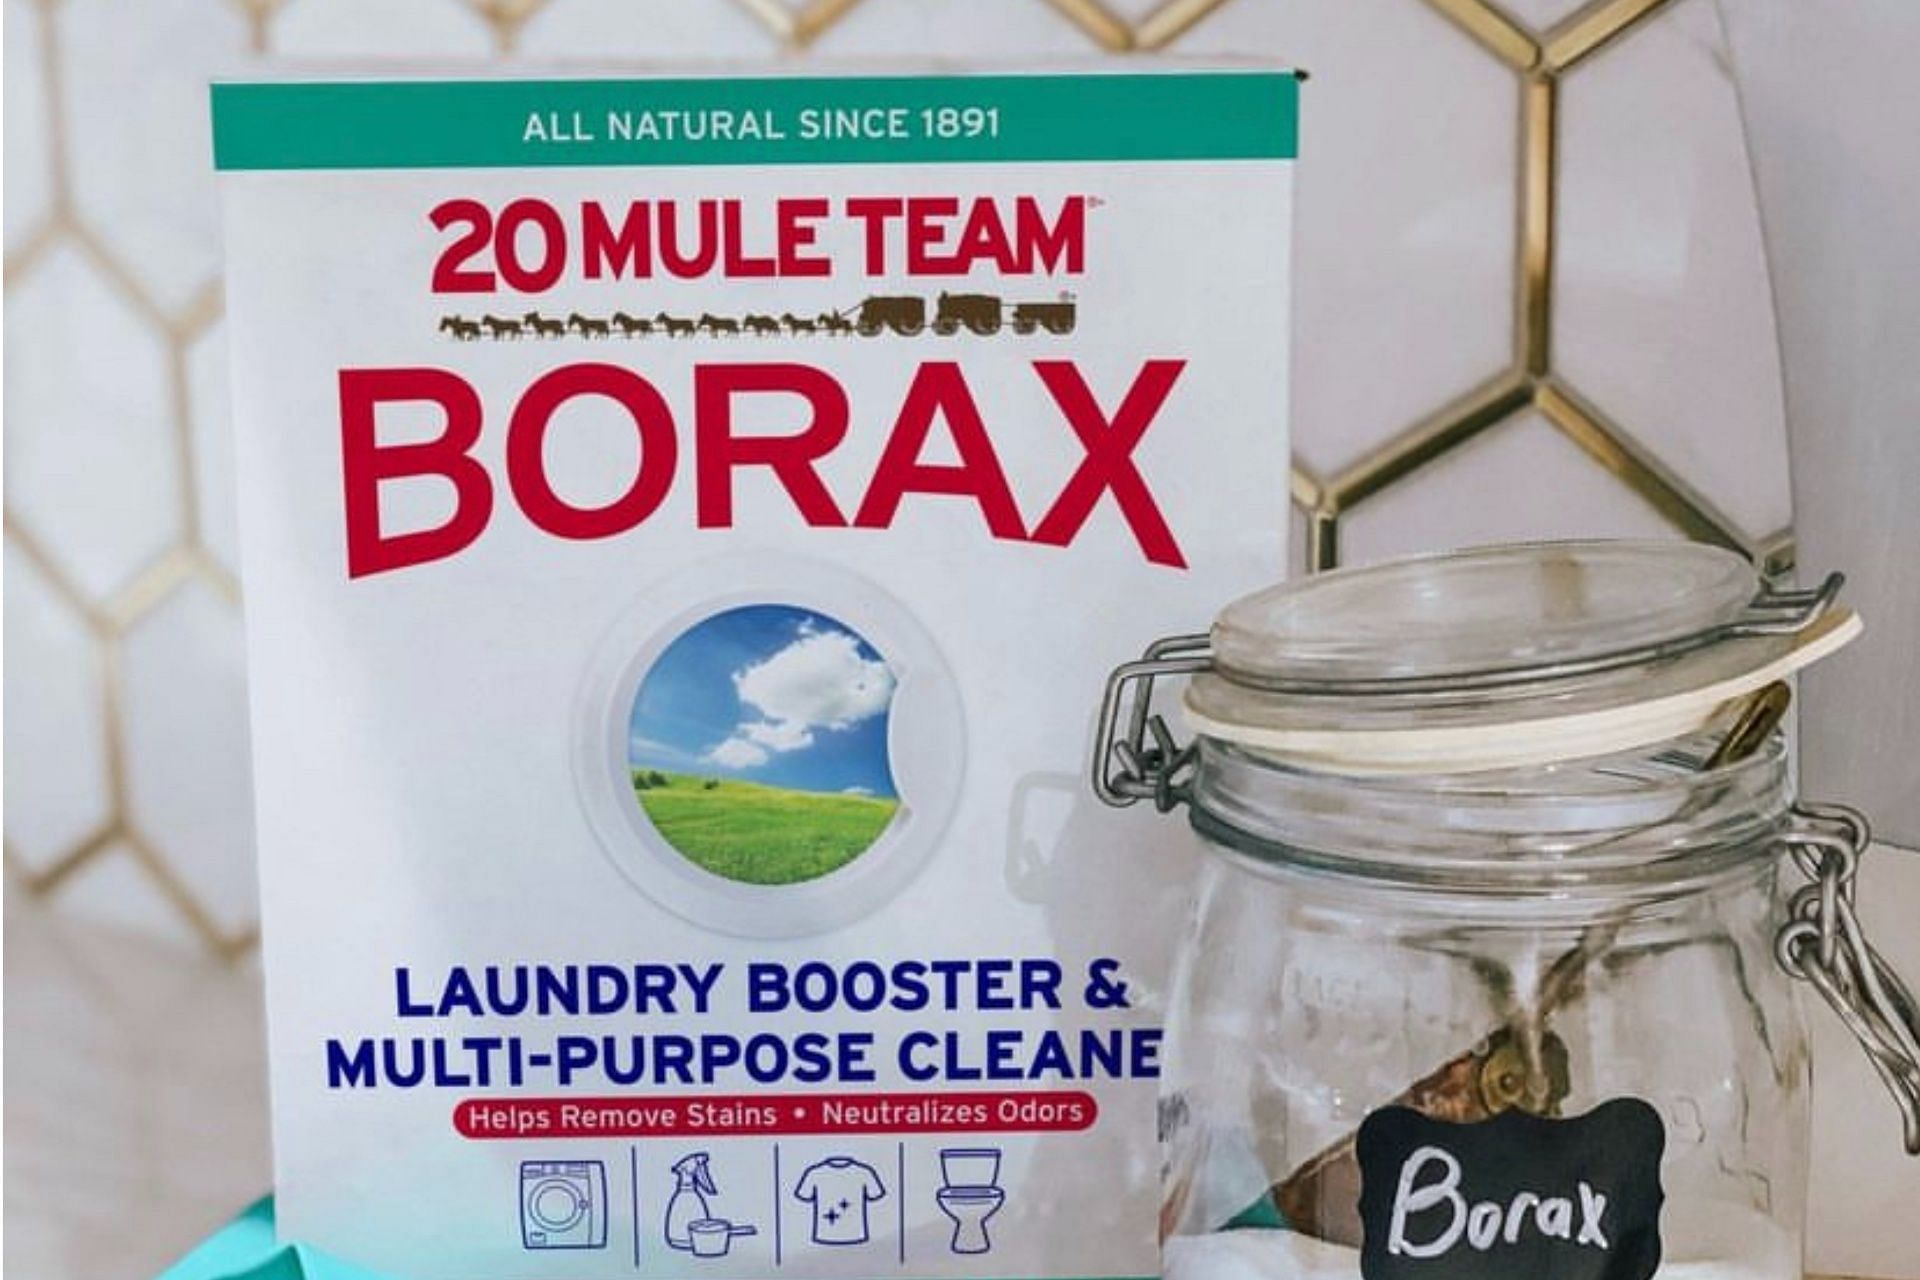 Borax challenge: The latest harmful health trend taking over TikTok and why  you should avoid it